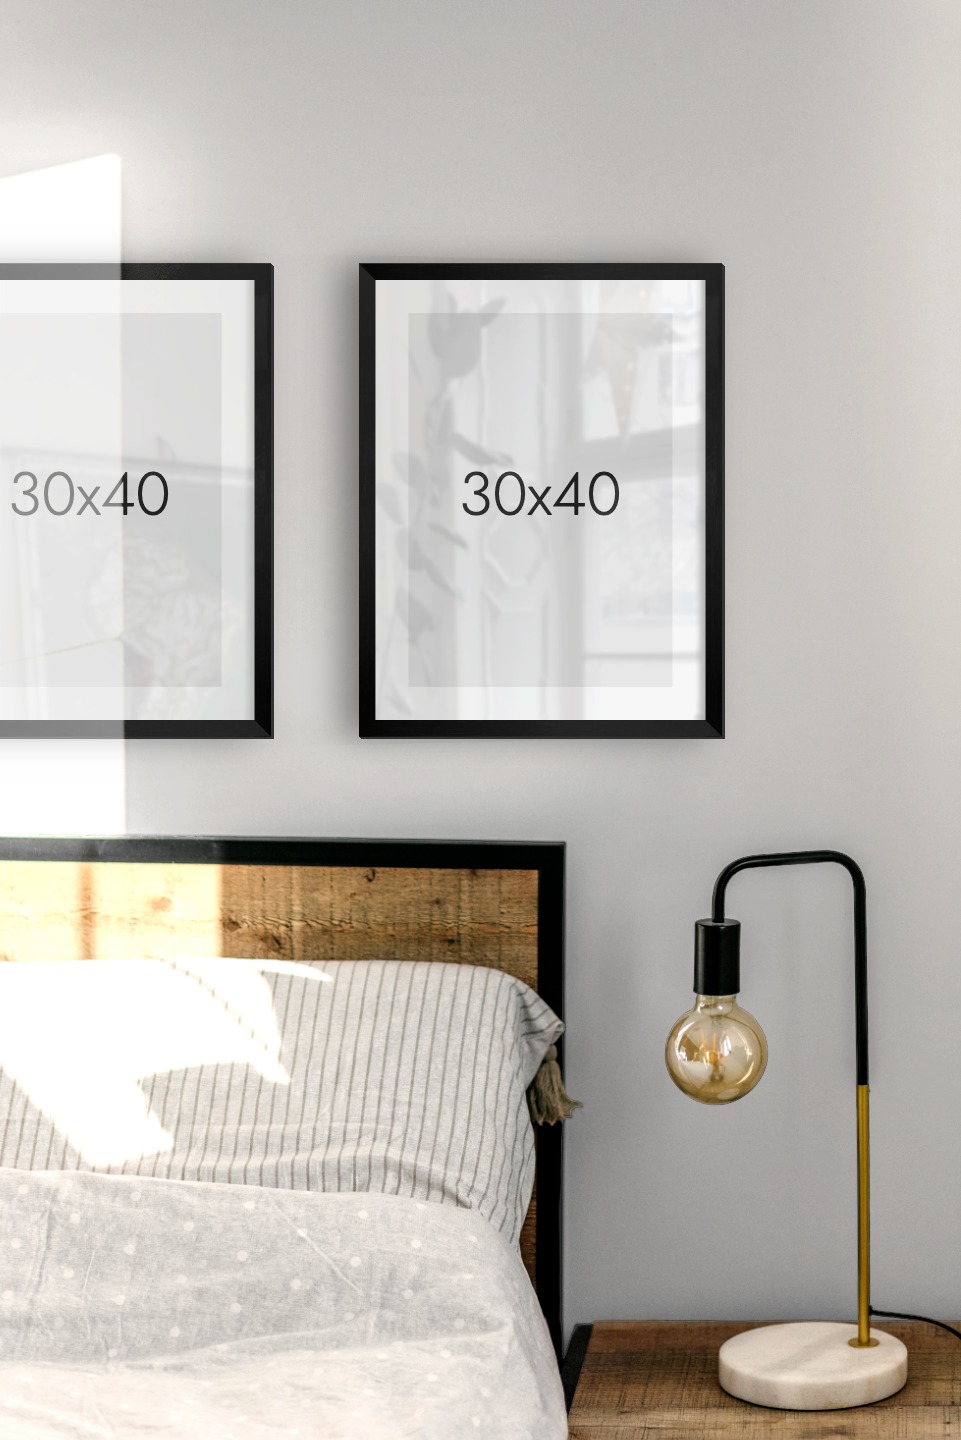 https://www.mywalldecorator.com/public/pages/select-frames-1.jpeg